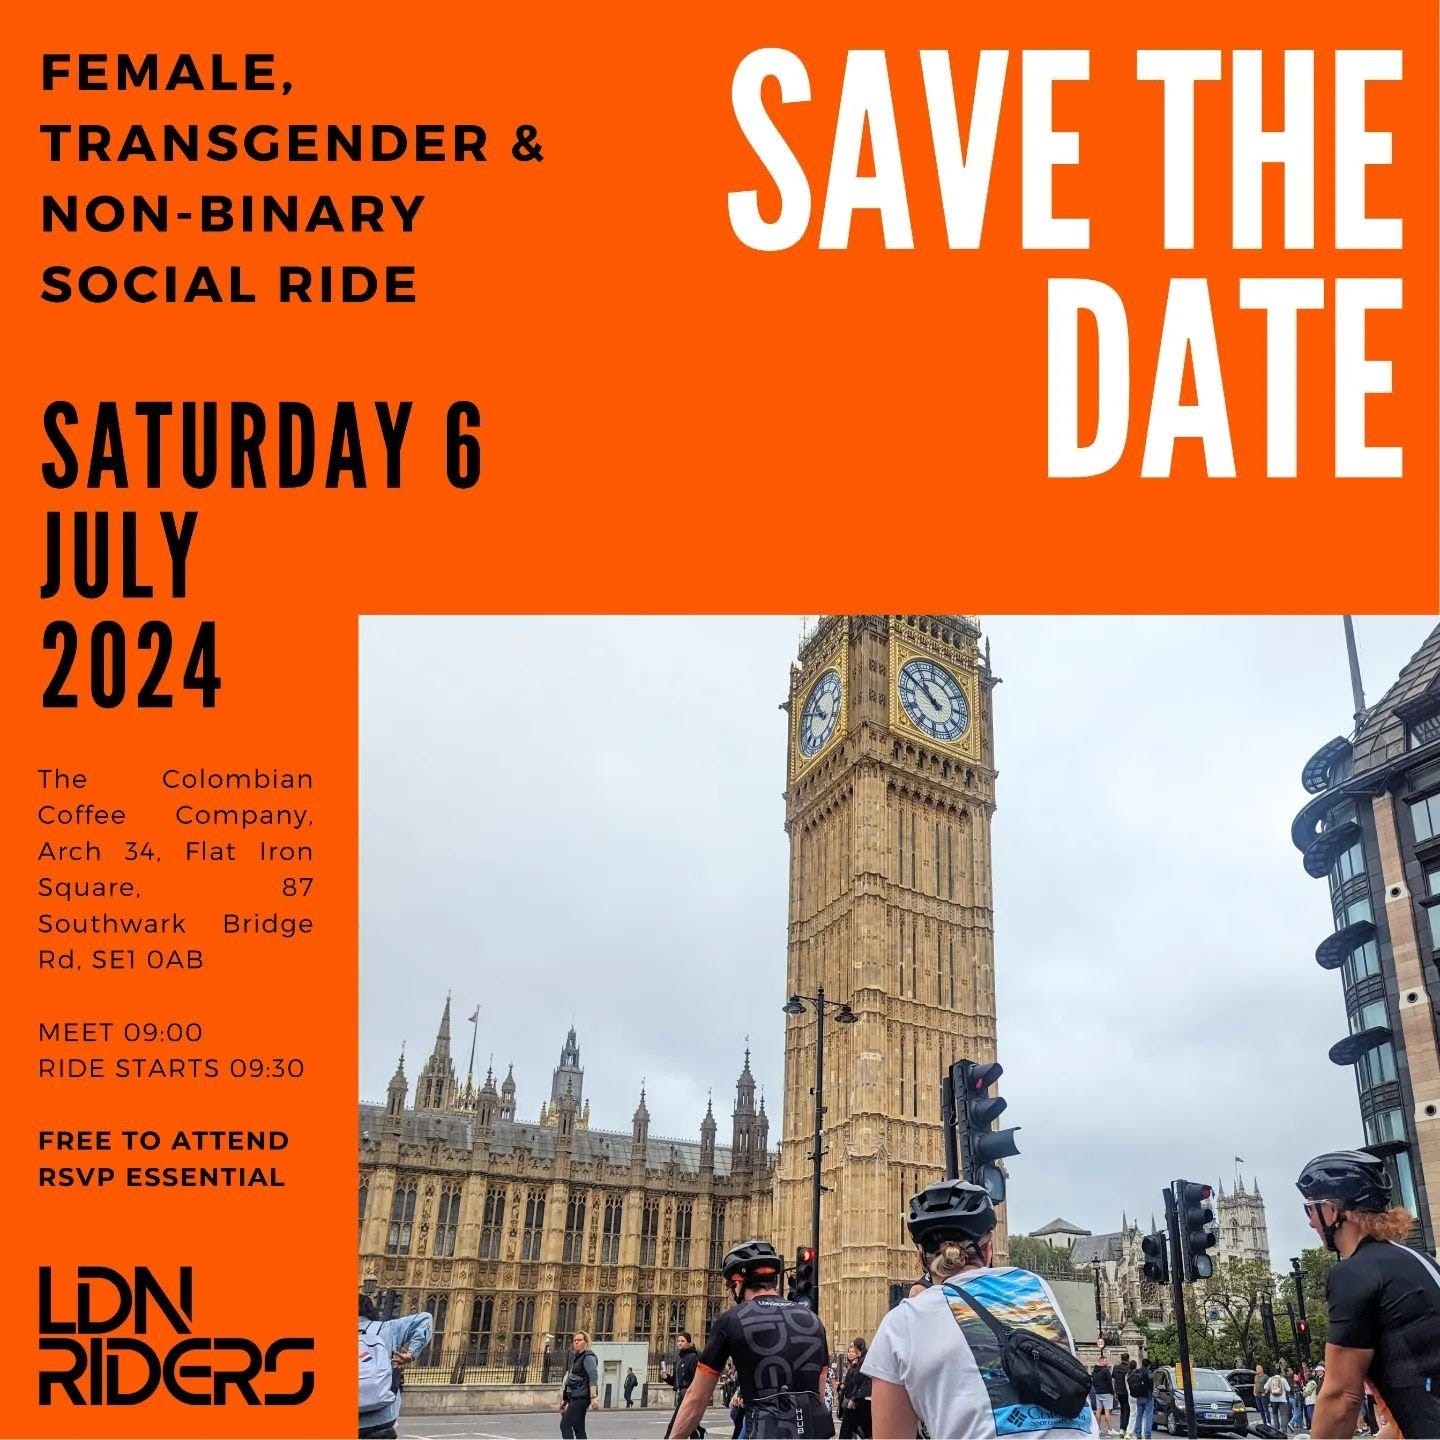 Our next female, trans and non-binary ride will take place on Saturday 6th July, led by @silvierit. 😍

Please spread the word. The ride is free to attend.

Register via link in bio.

#femalecyclists #transgender #nonbinary